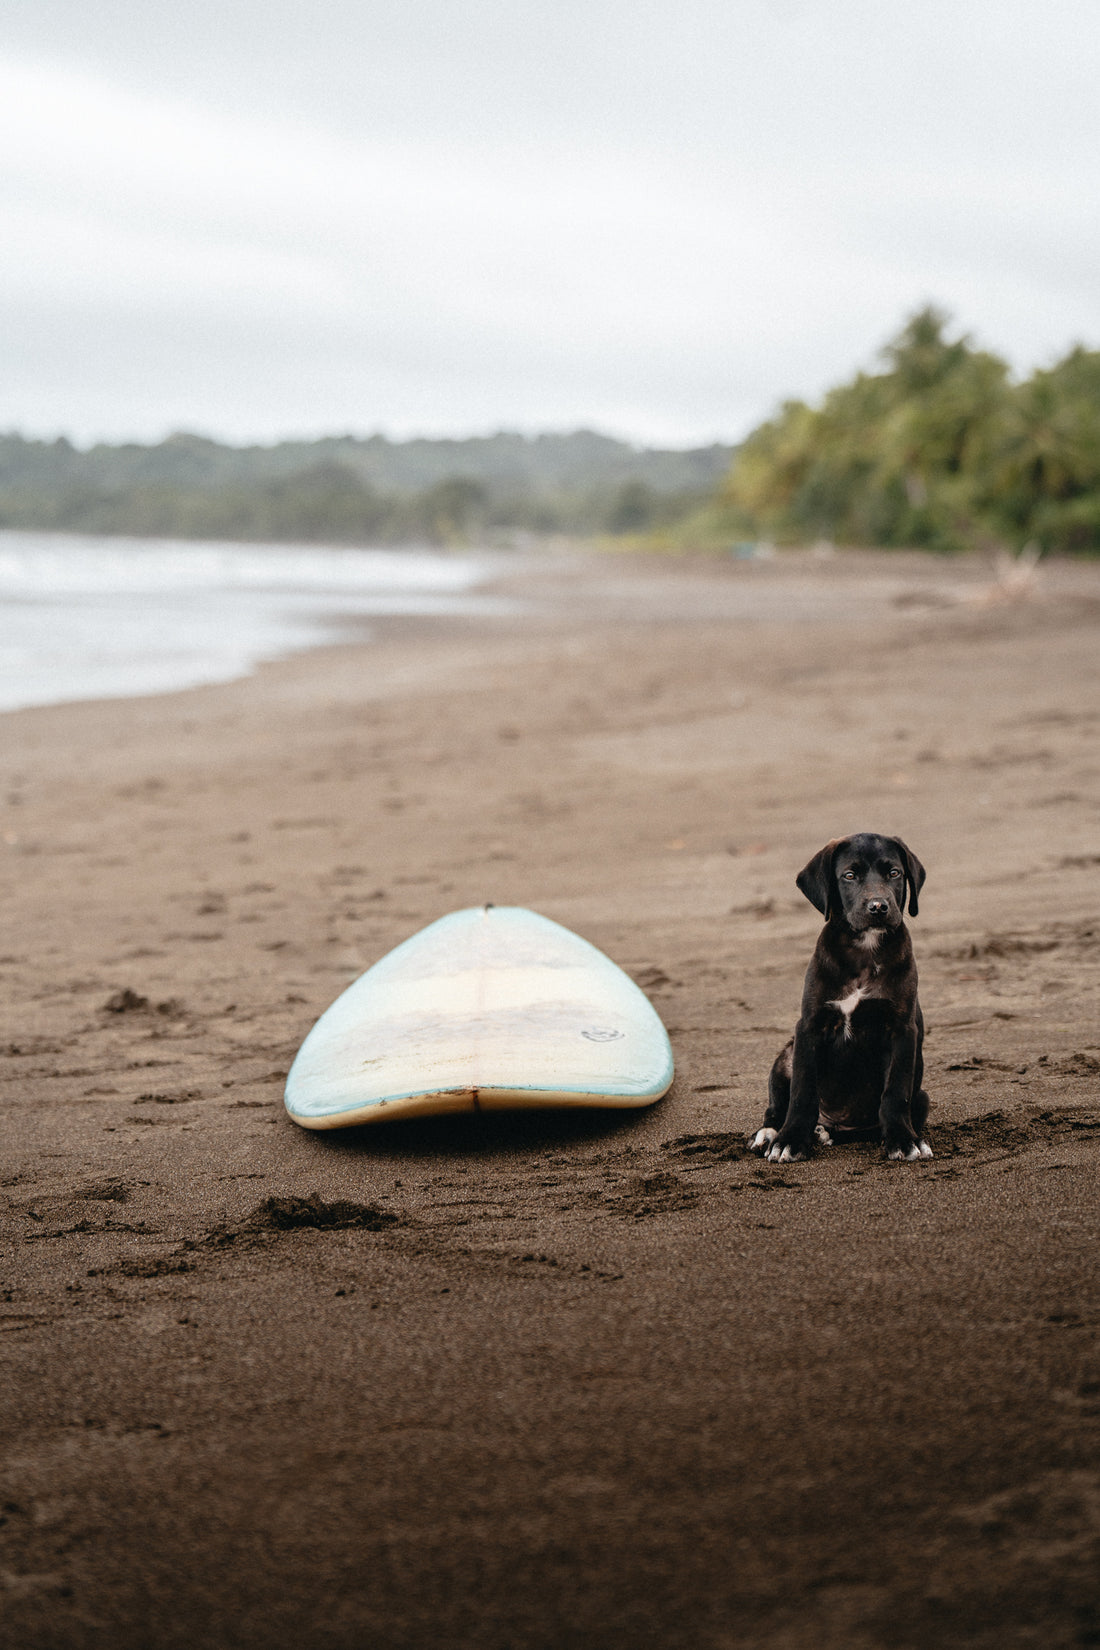 Dog on a beach next to a surf board.